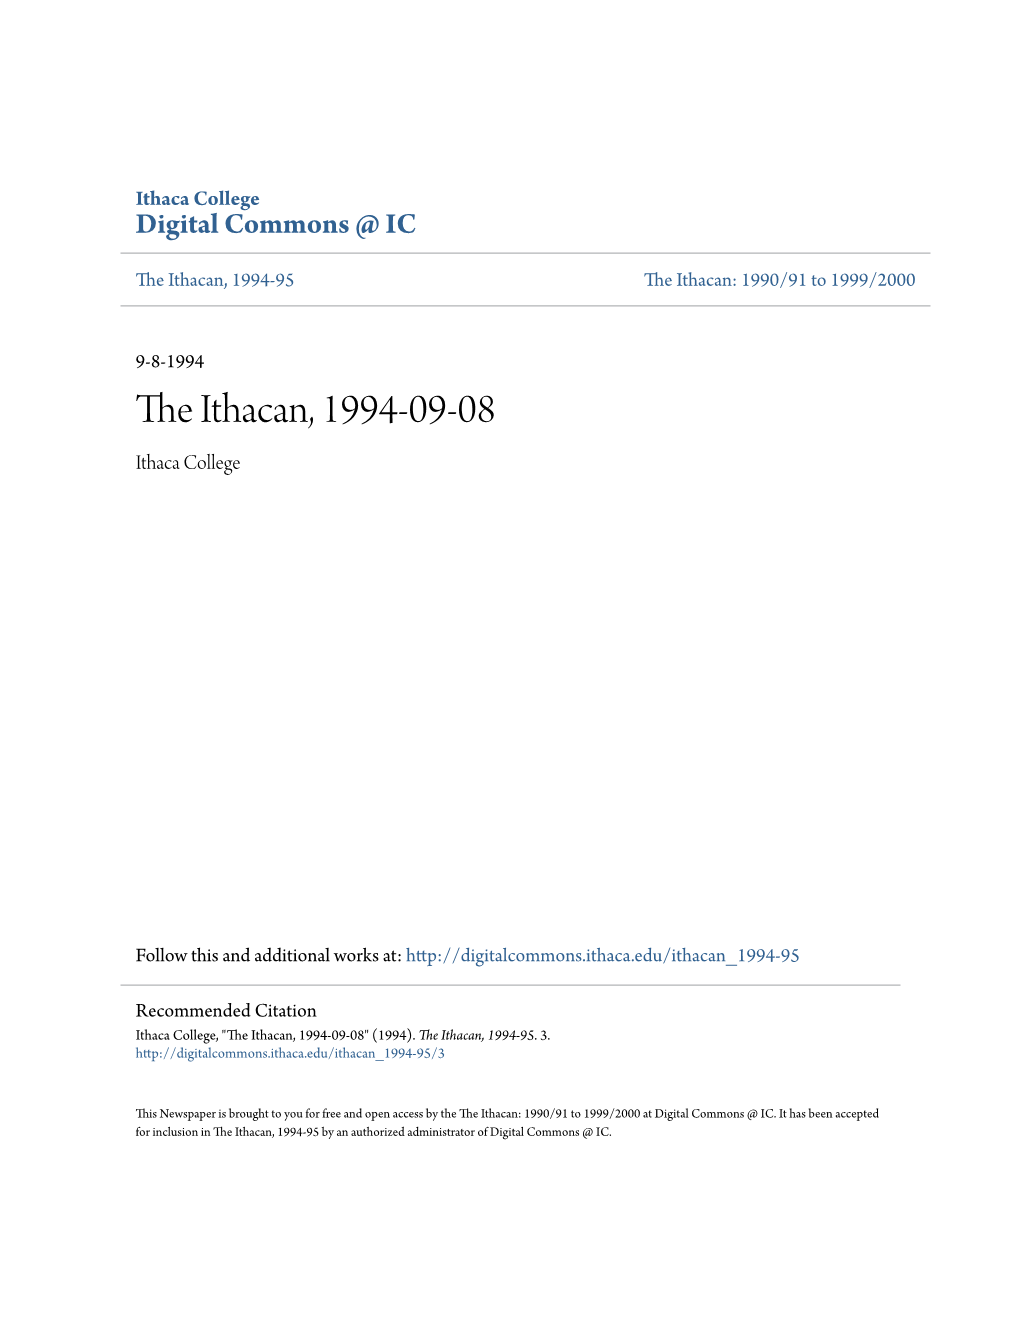 The Ithacan, 1994-09-08